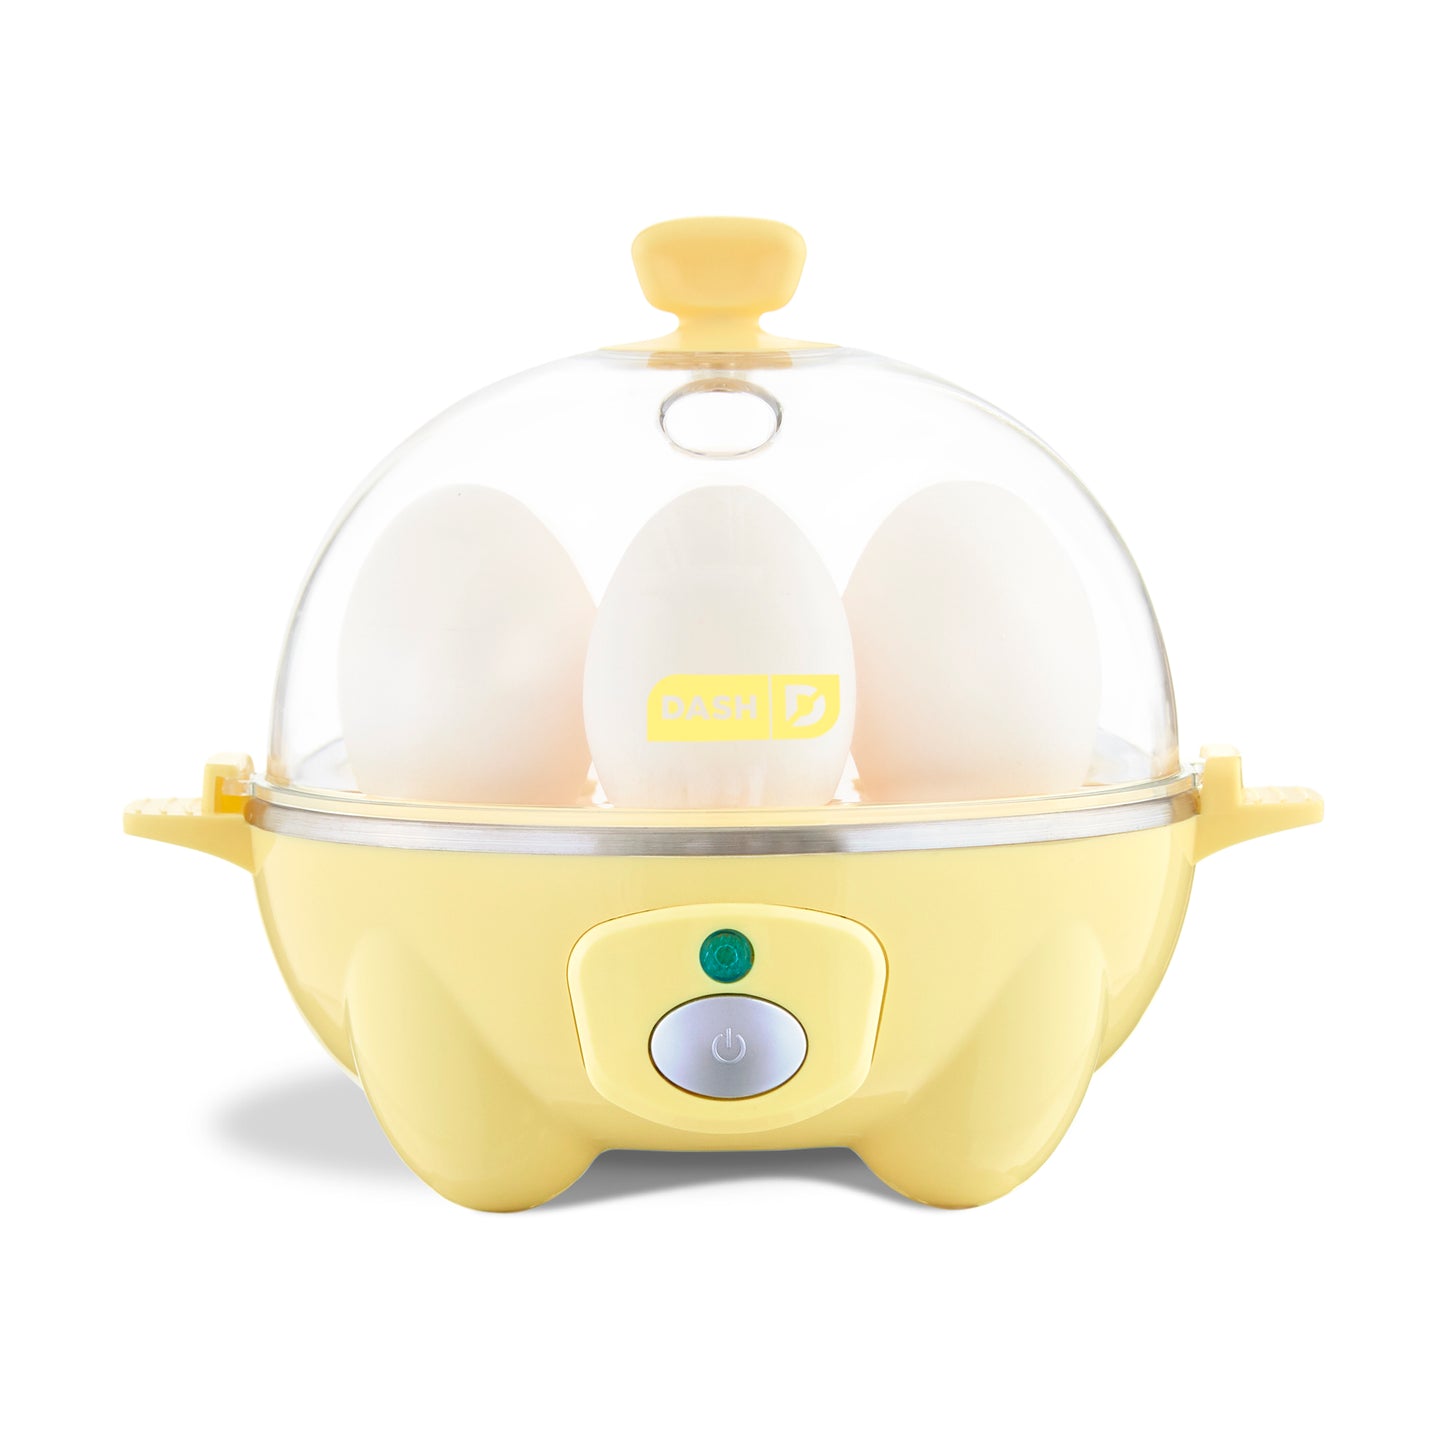 Electric Egg Cooker for Hard Boiled Eggs - China Egg Cooker and Cooker for Hard  Boiled Eggs price